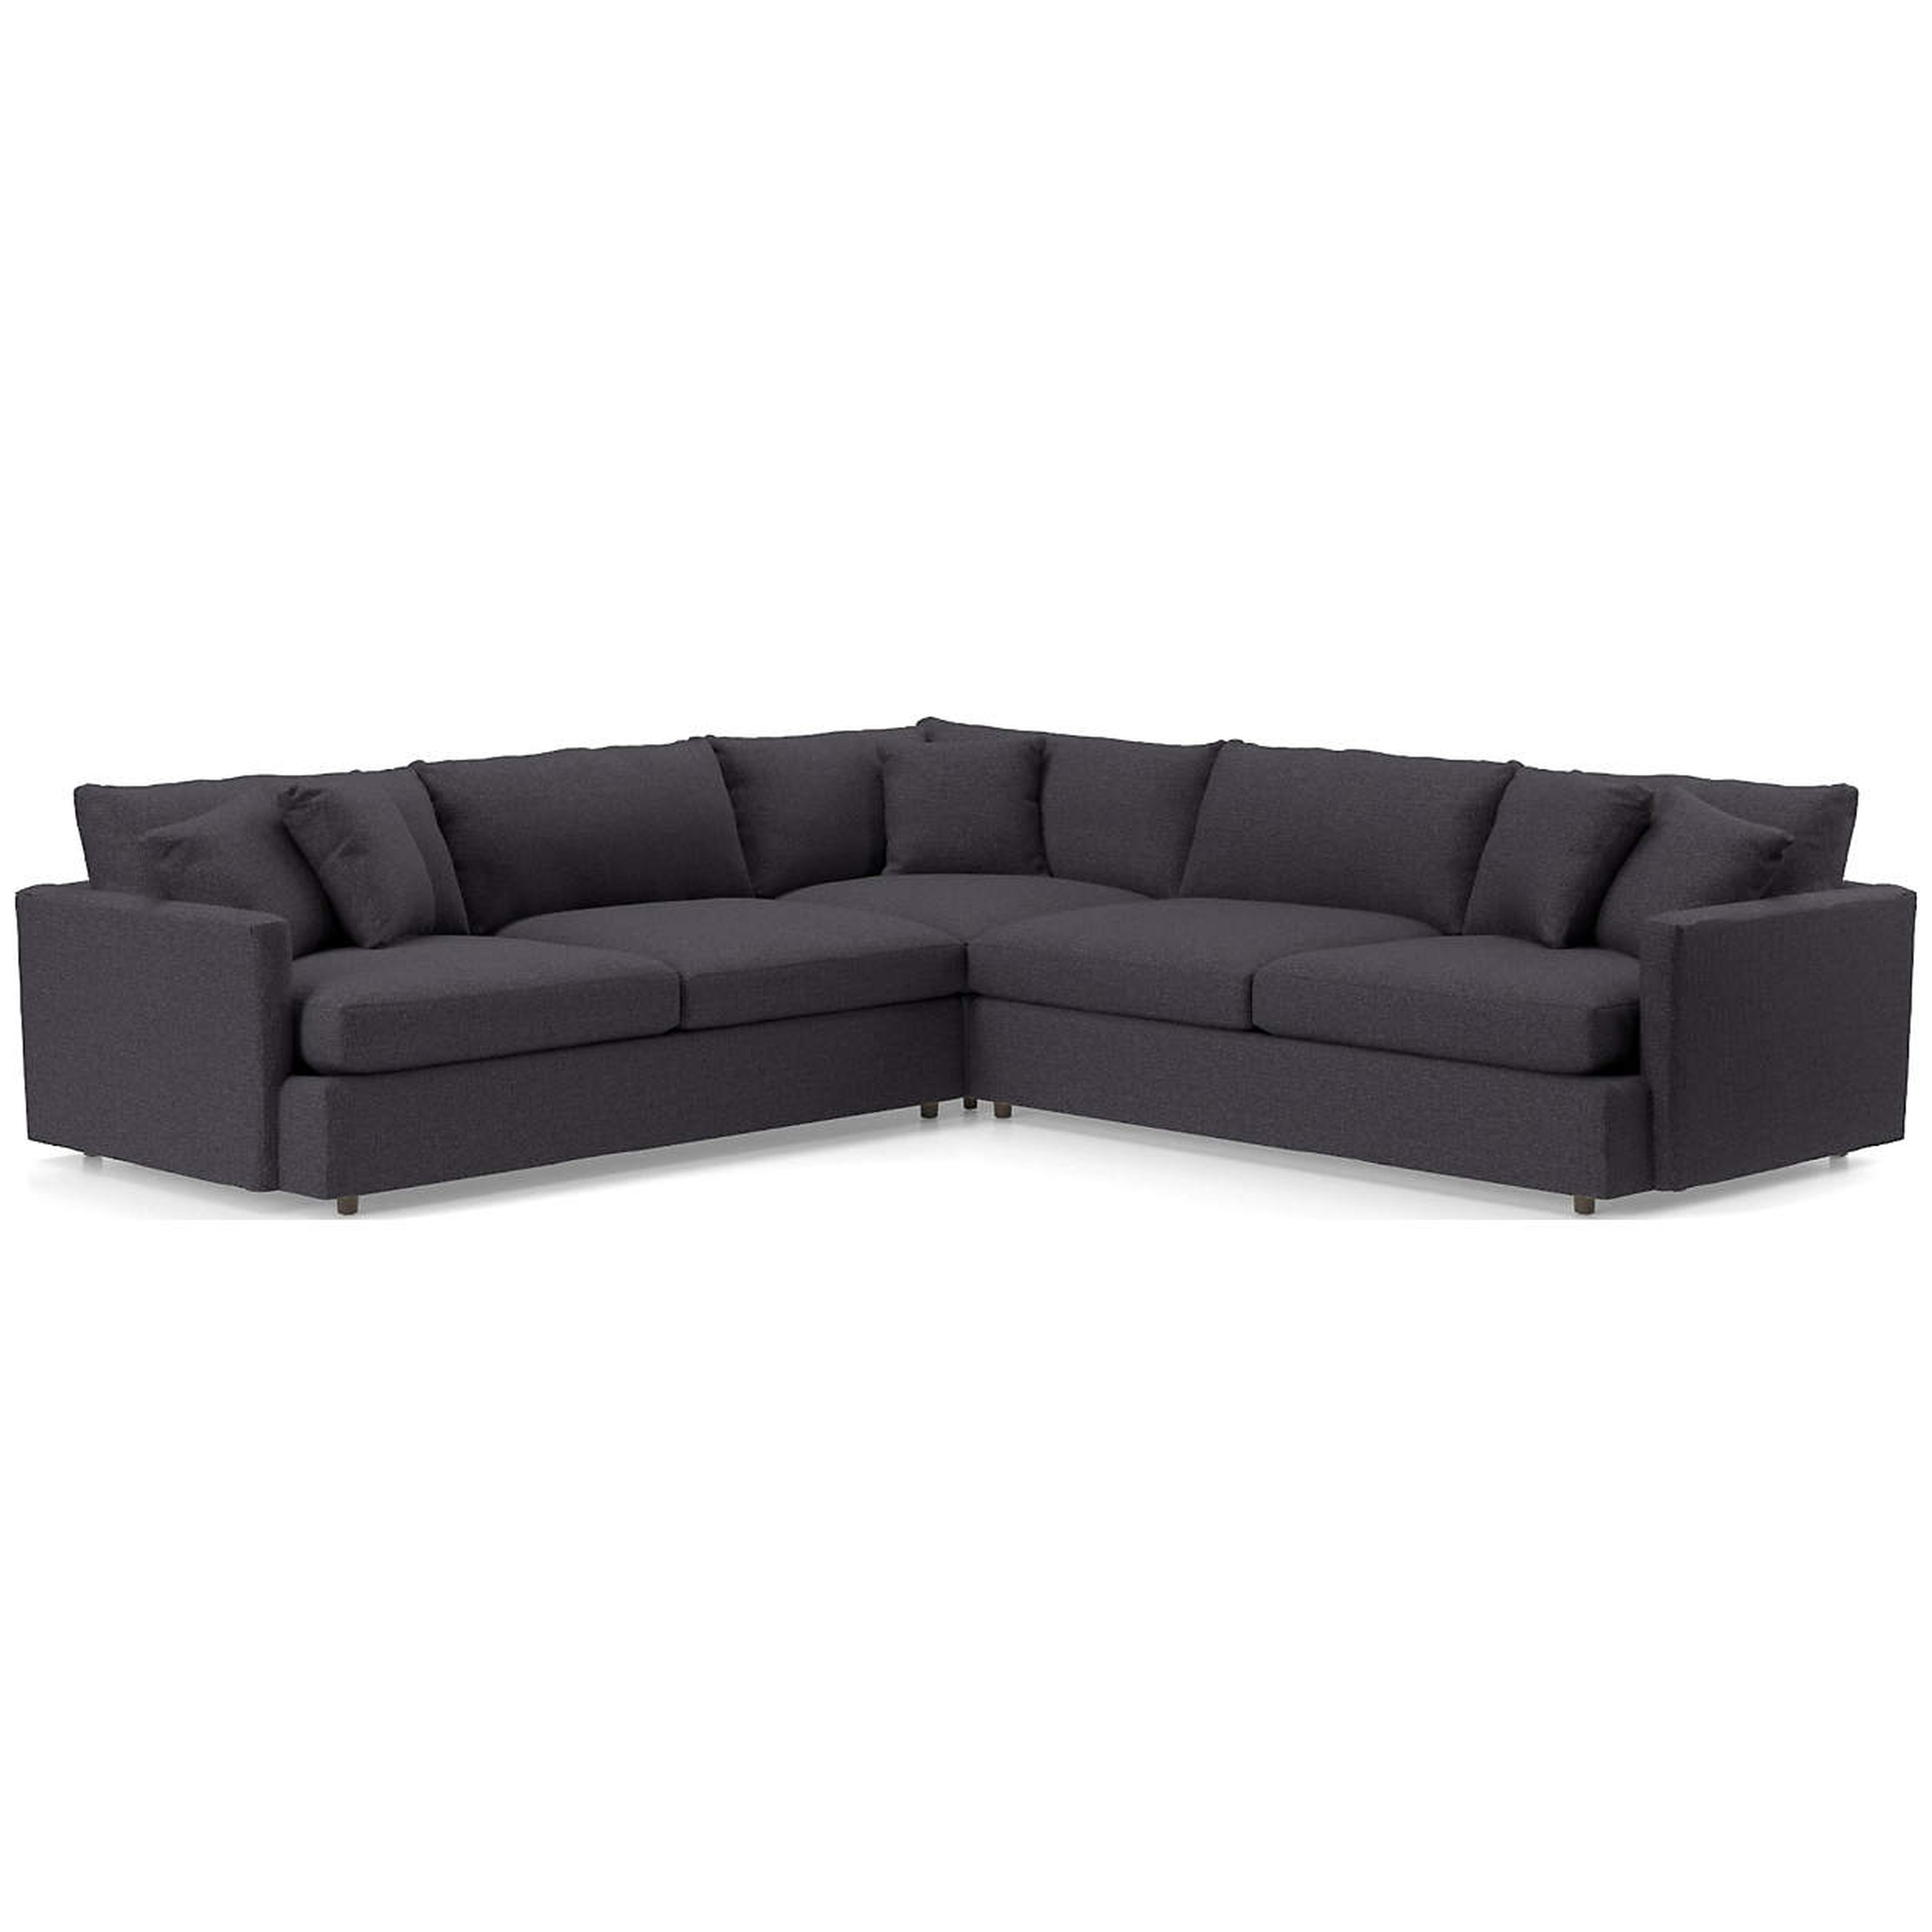 Lounge II 3-Piece Sectional Sofa - Crate and Barrel